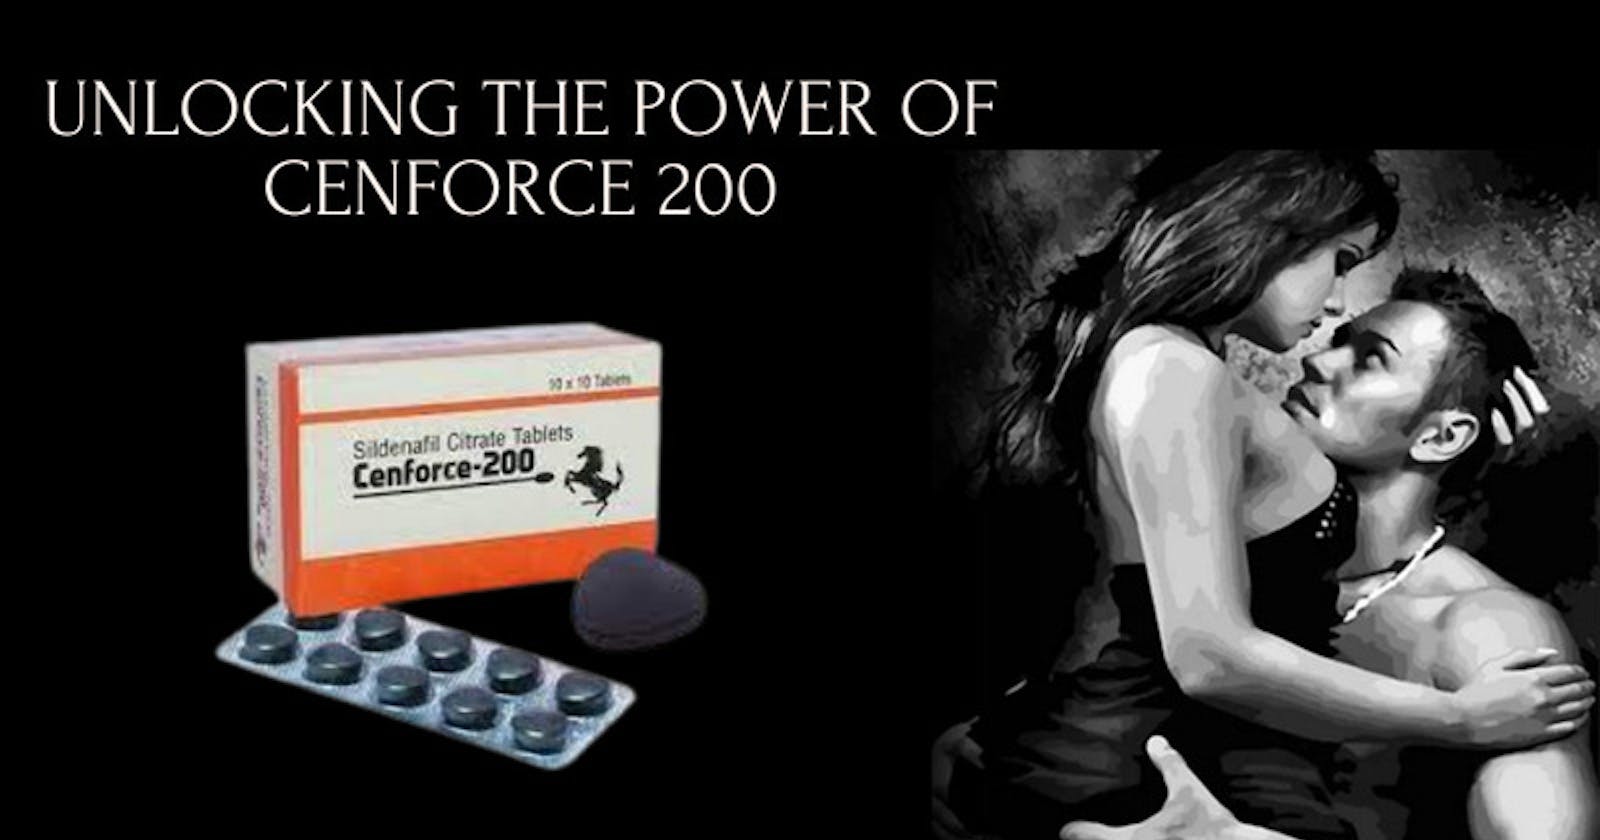 Cenforce 200mg: A Pill for Passion and Pleasure